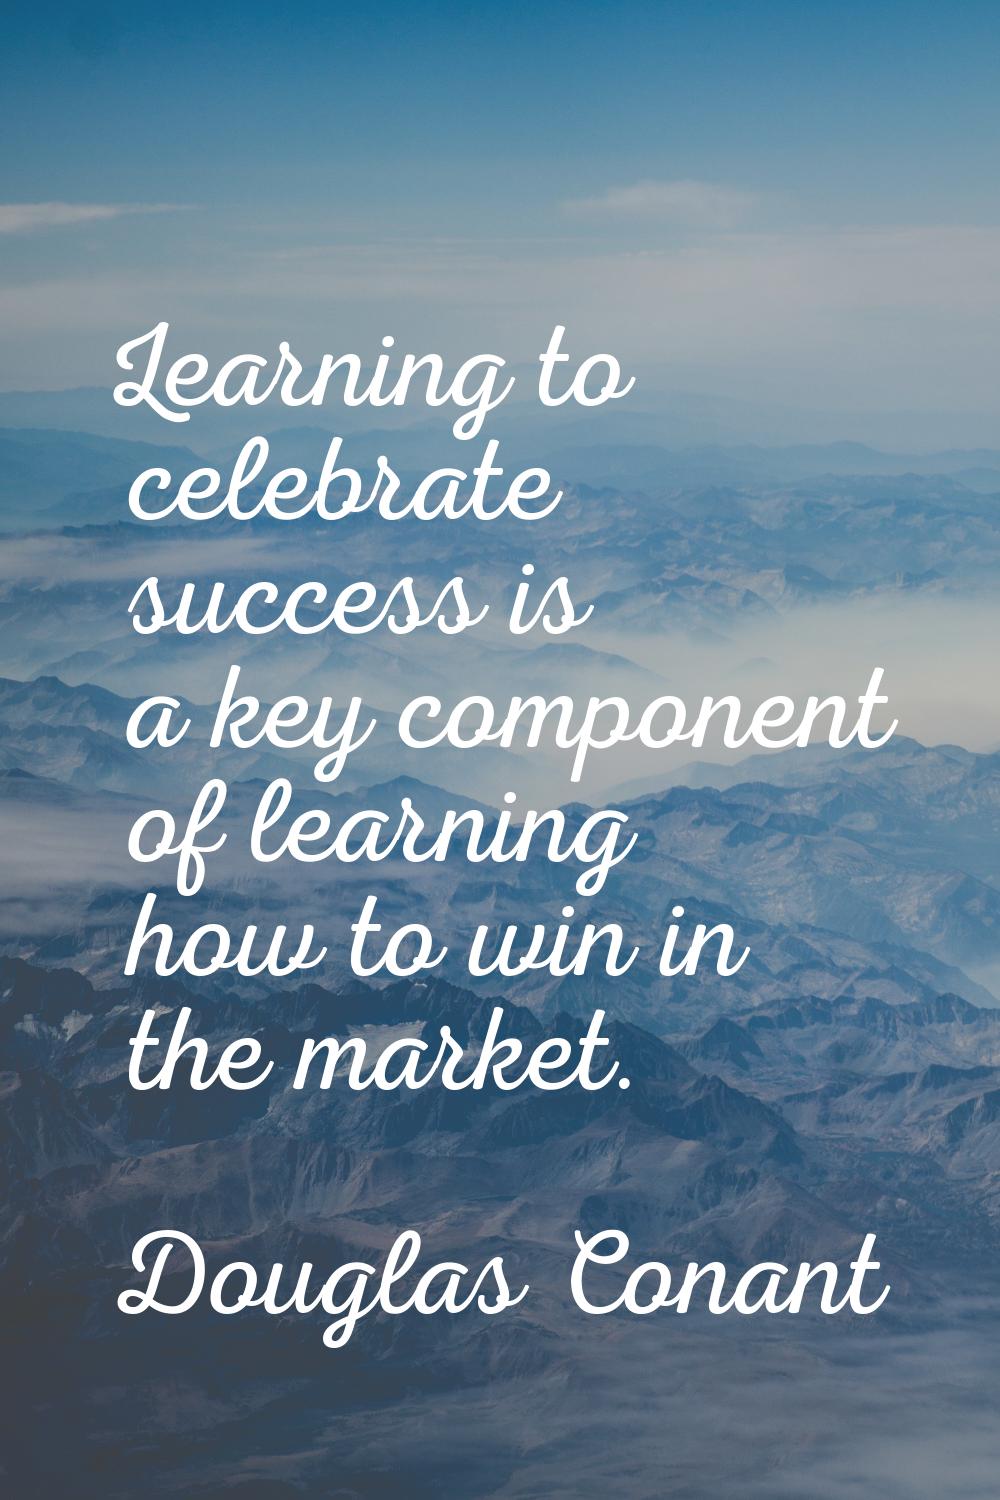 Learning to celebrate success is a key component of learning how to win in the market.